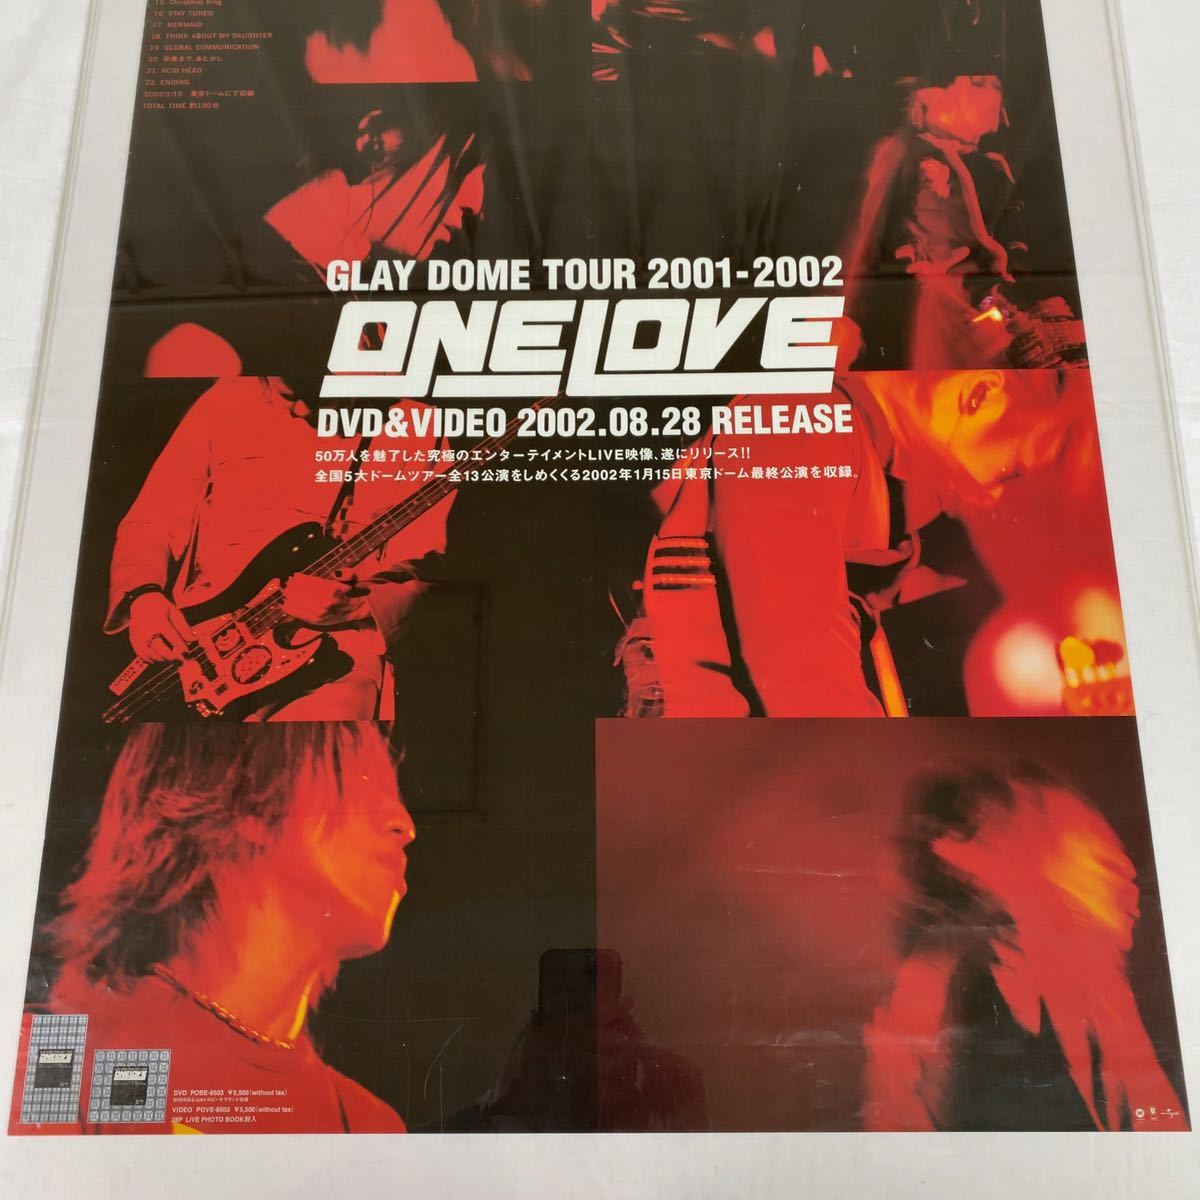 GLAY DOME TOUR 2001-2002 ONE LOVE ポスター 当時物 ライブ 告知 広告 ヴィンテージ_画像3